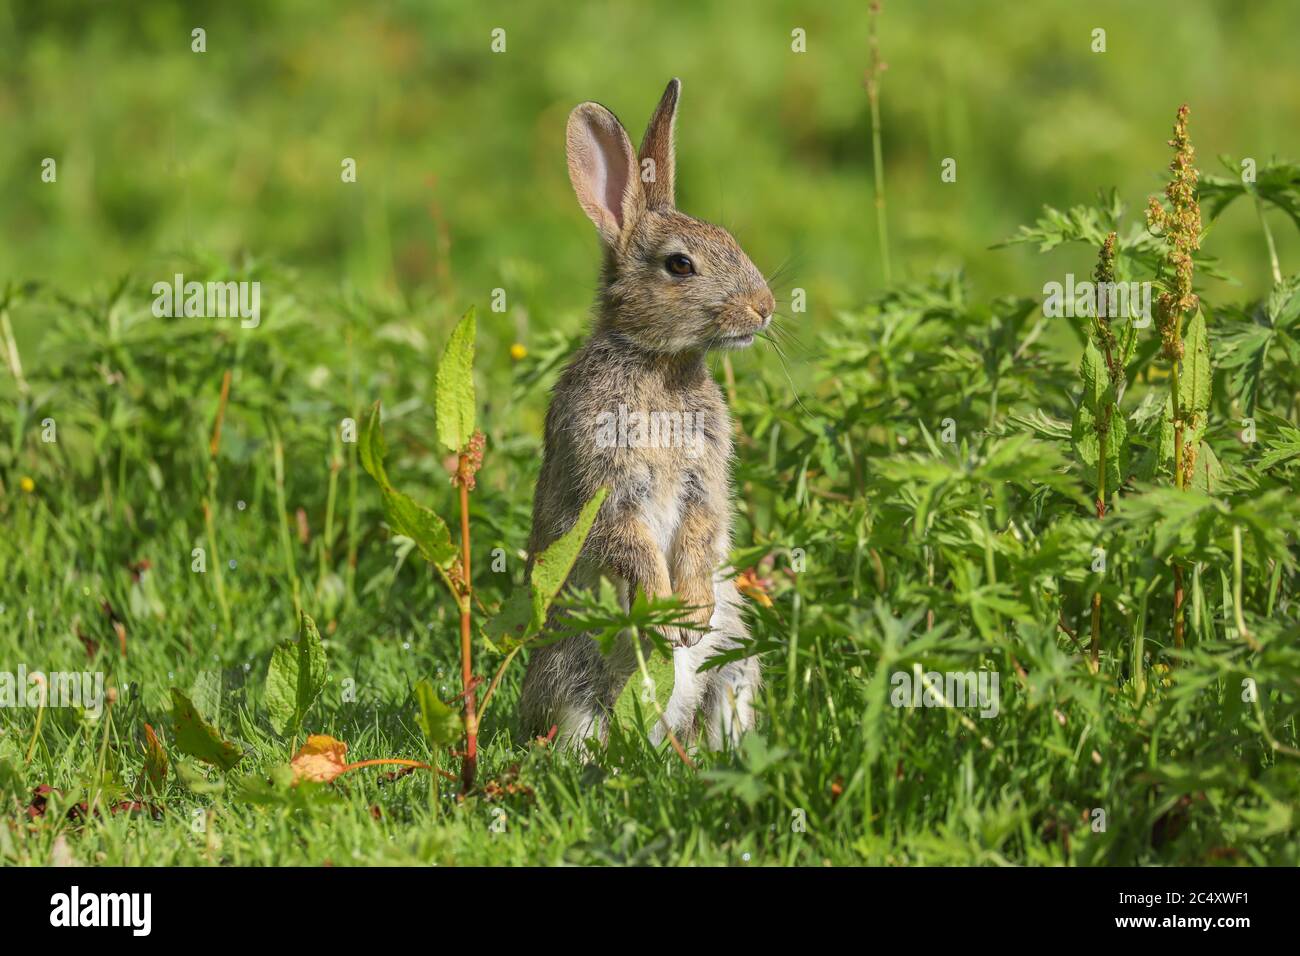 A cute Wild Rabbit (Oryctolagus cuniculus) sitting in a field in the british countryside. Stock Photo